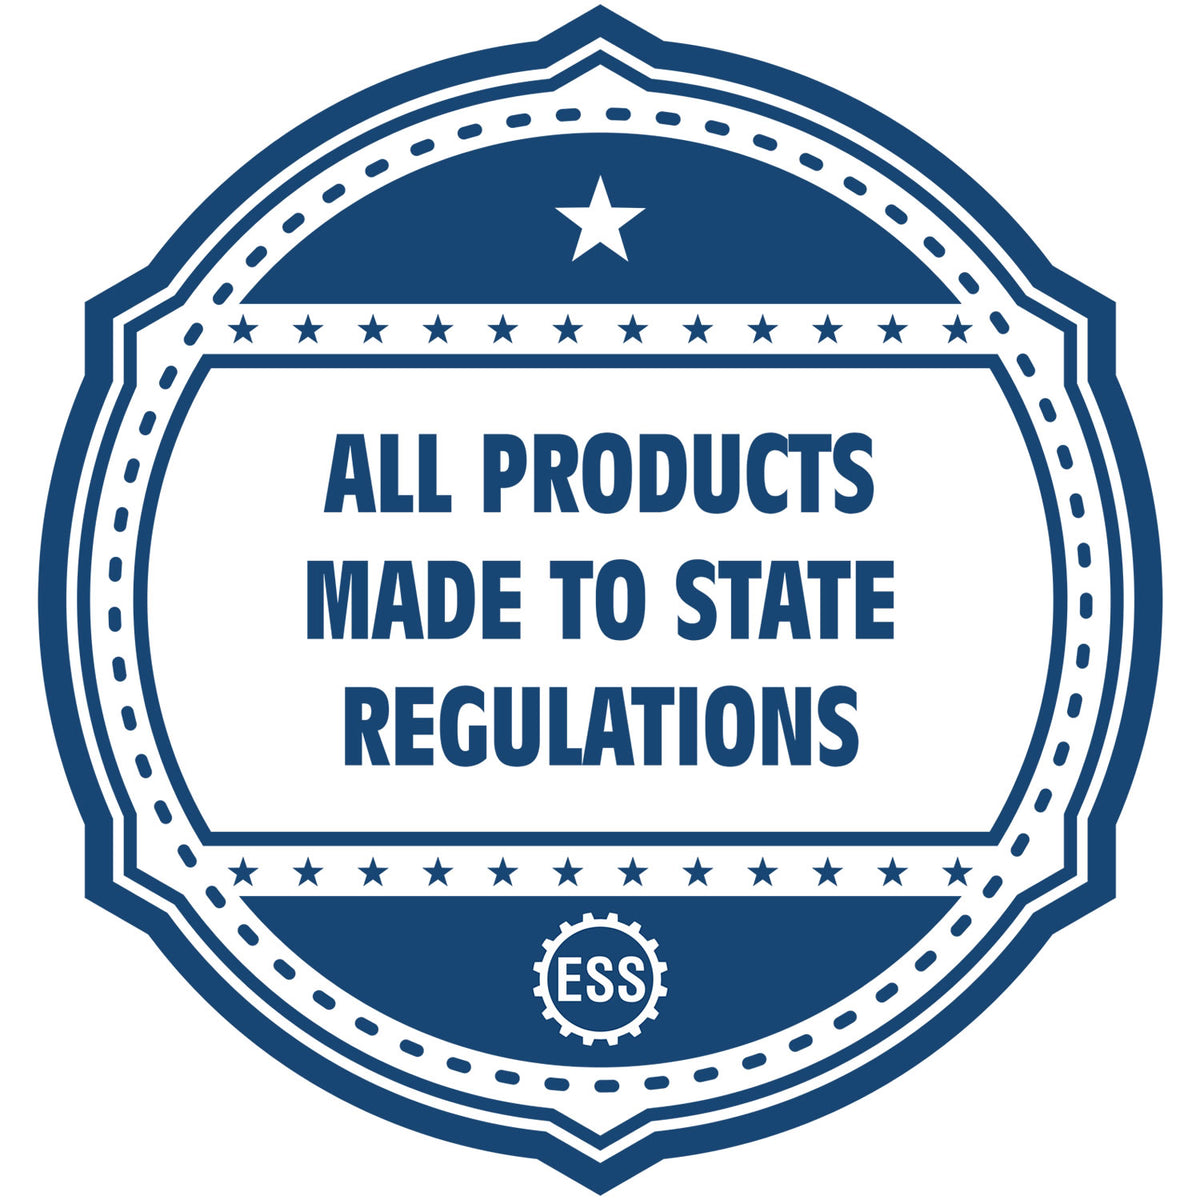 An icon or badge element for the Heavy Duty Cast Iron Rhode Island Architect Embosser showing that this product is made in compliance with state regulations.